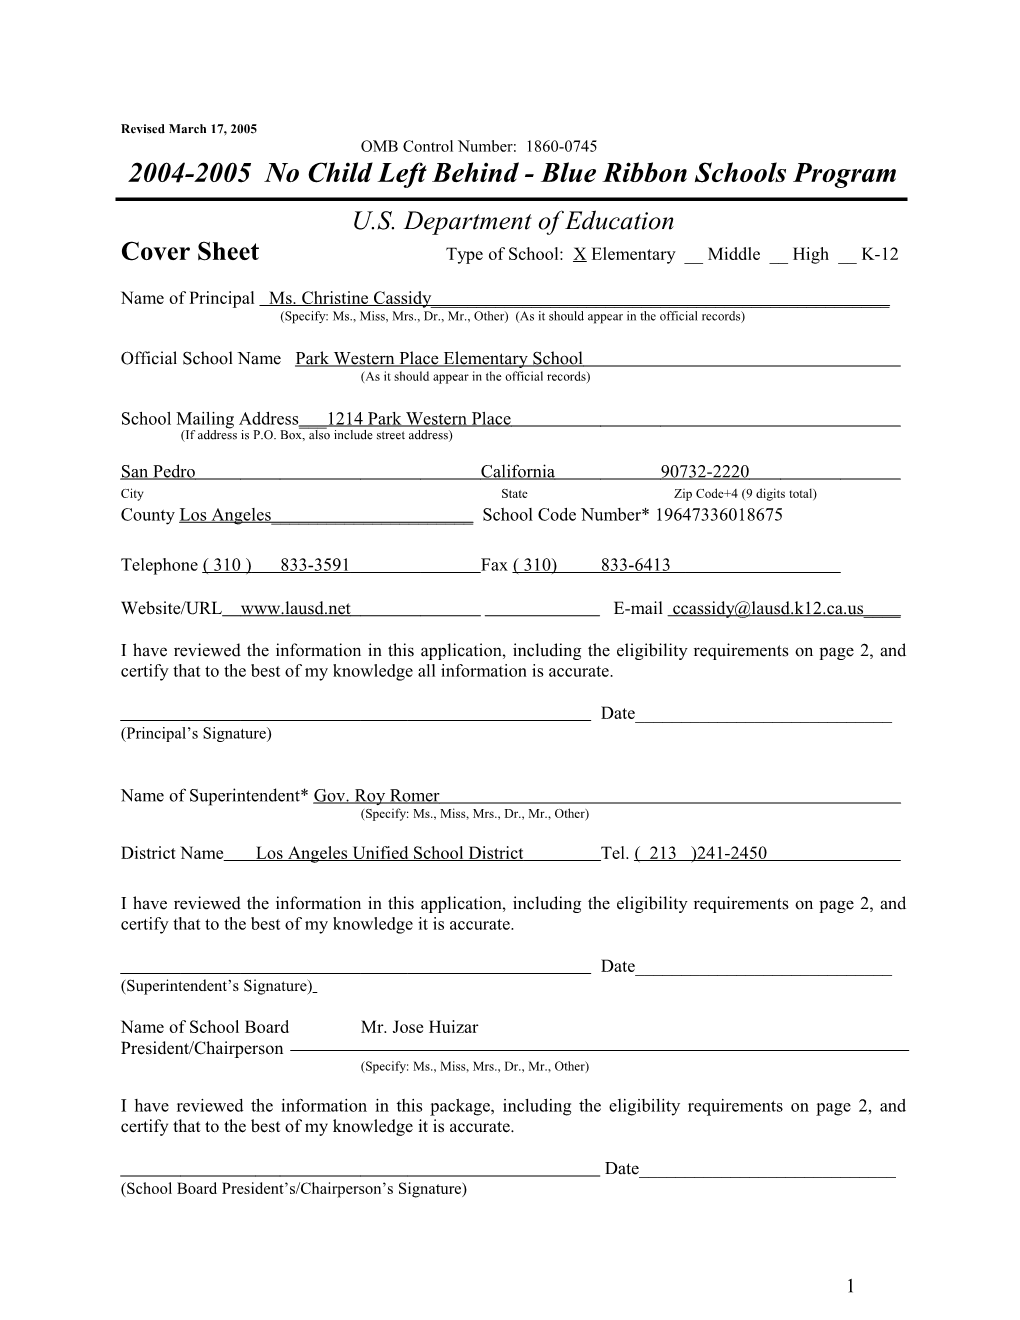 Park Western Place Elementary School Application: 2004-2005, No Child Left Behind - Blue